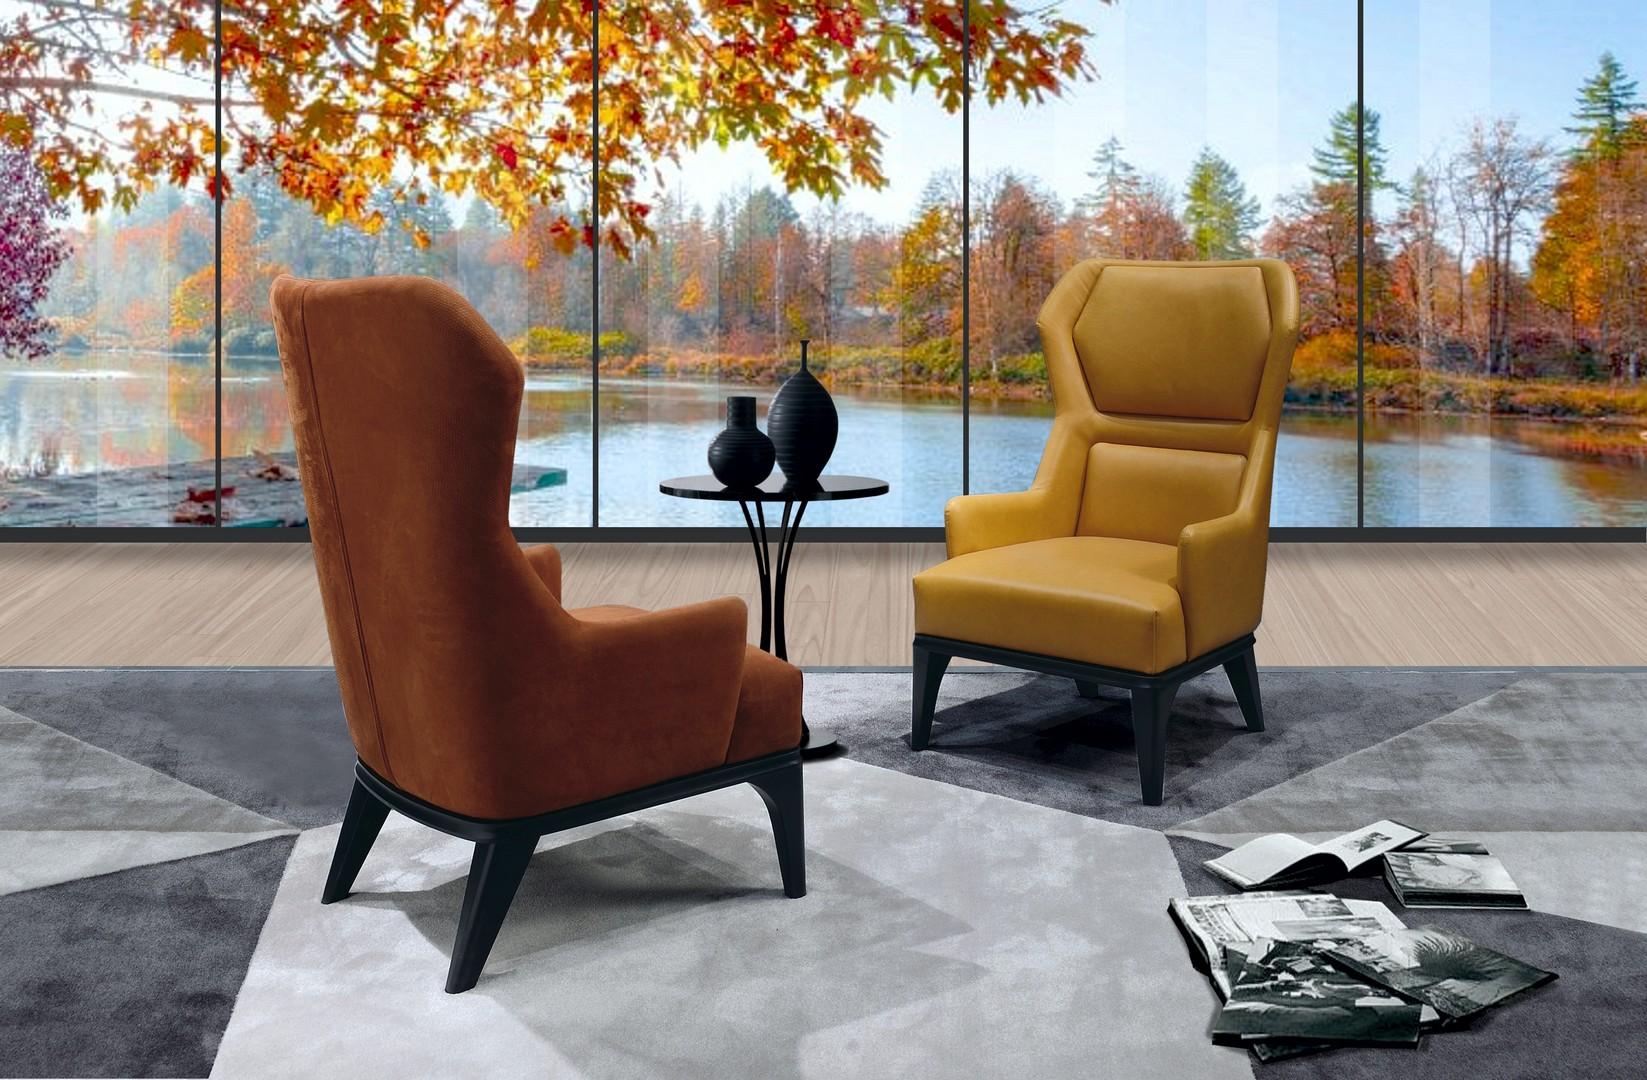 Relax armchair made of a wooden structure coated with polyurethane in different densities. The armchair is enhanced by 